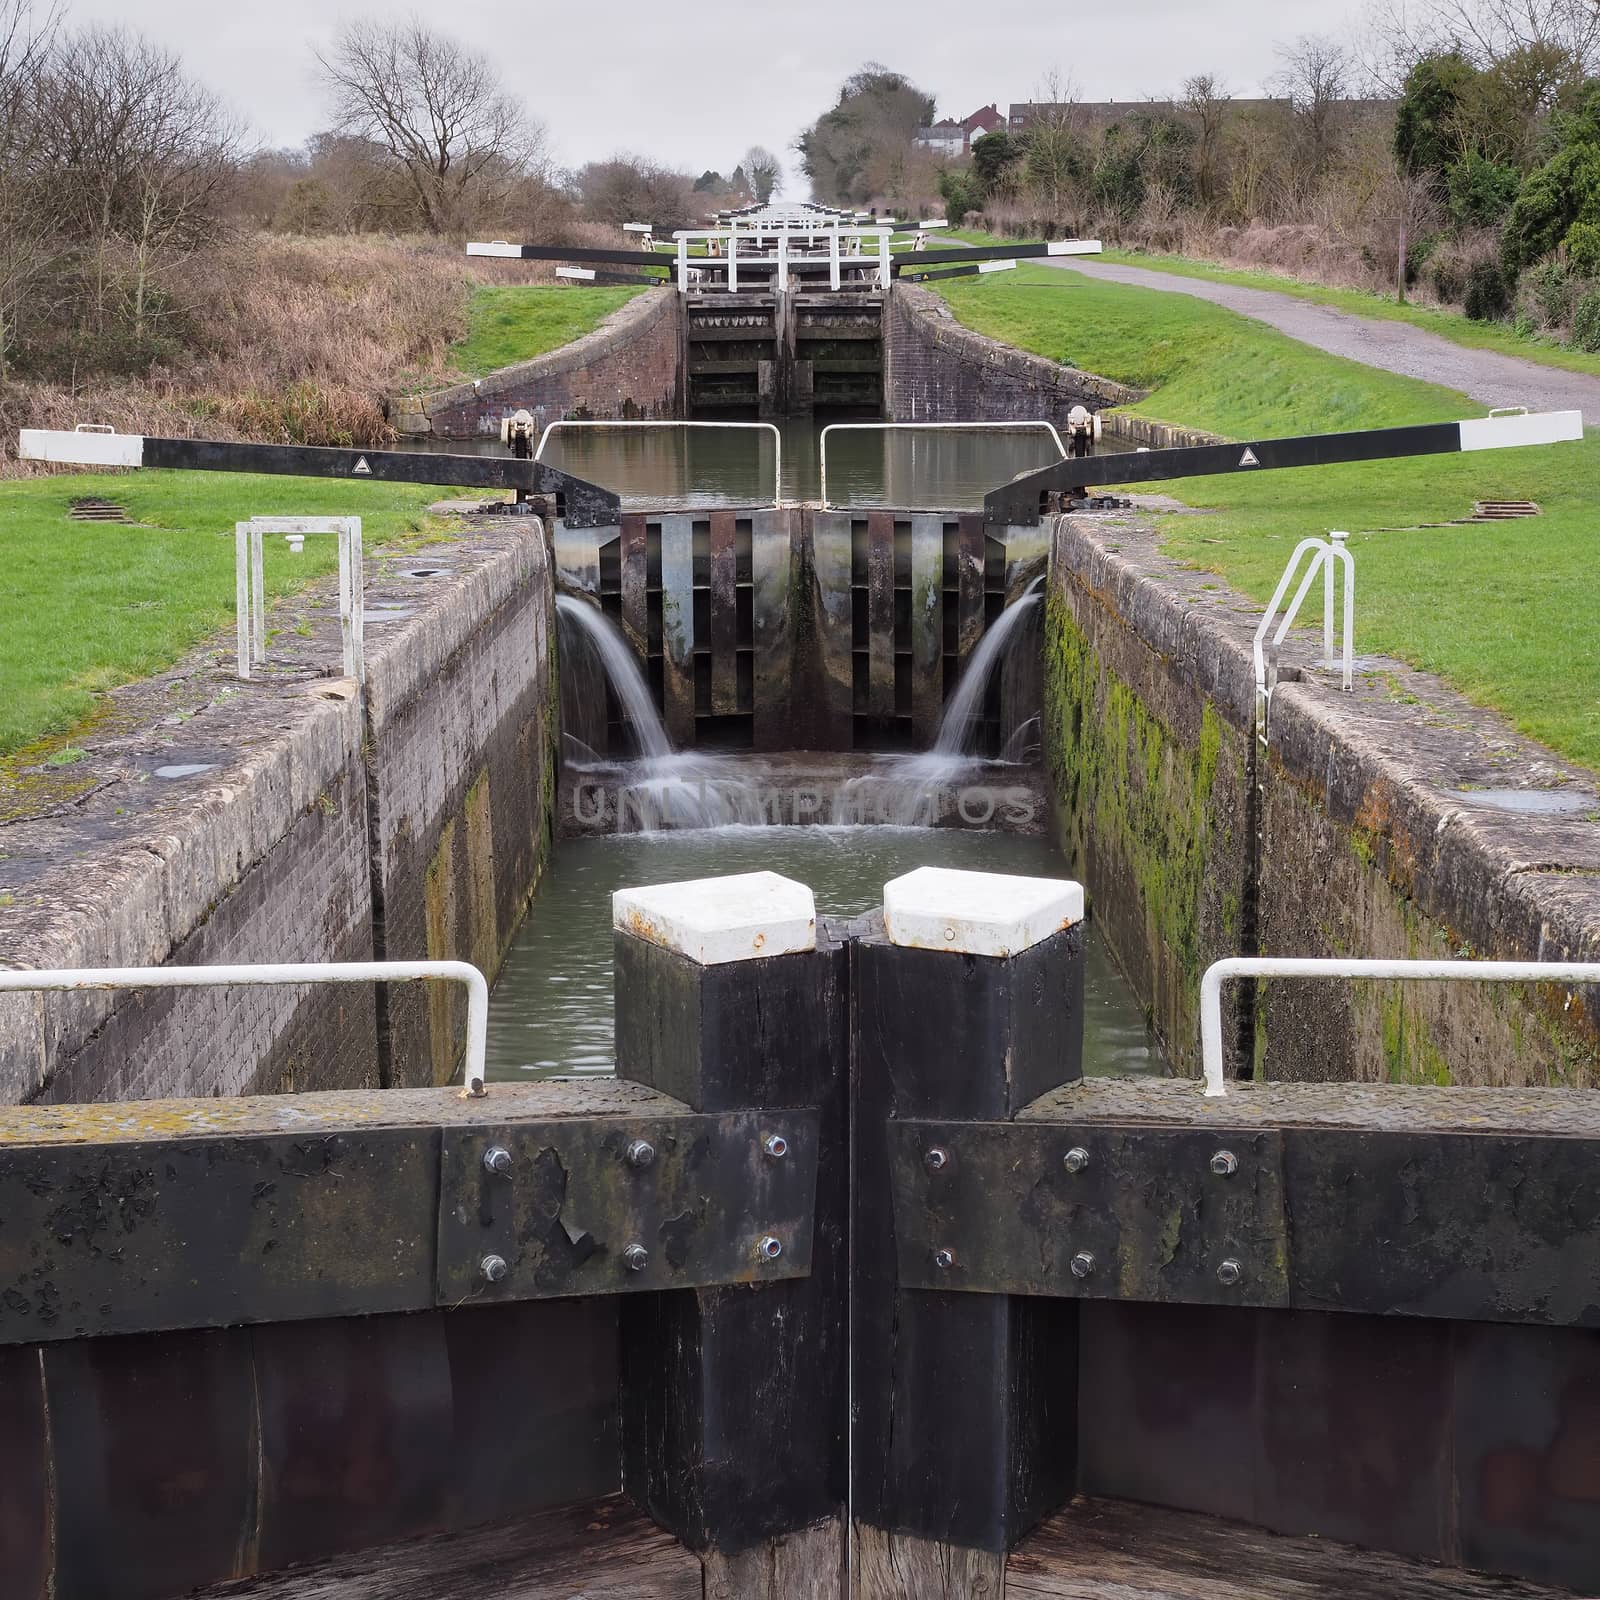 View up flight of Caen Hill locks, Kennet and Avon canal, Devizes, Wiltshire by PhilHarland